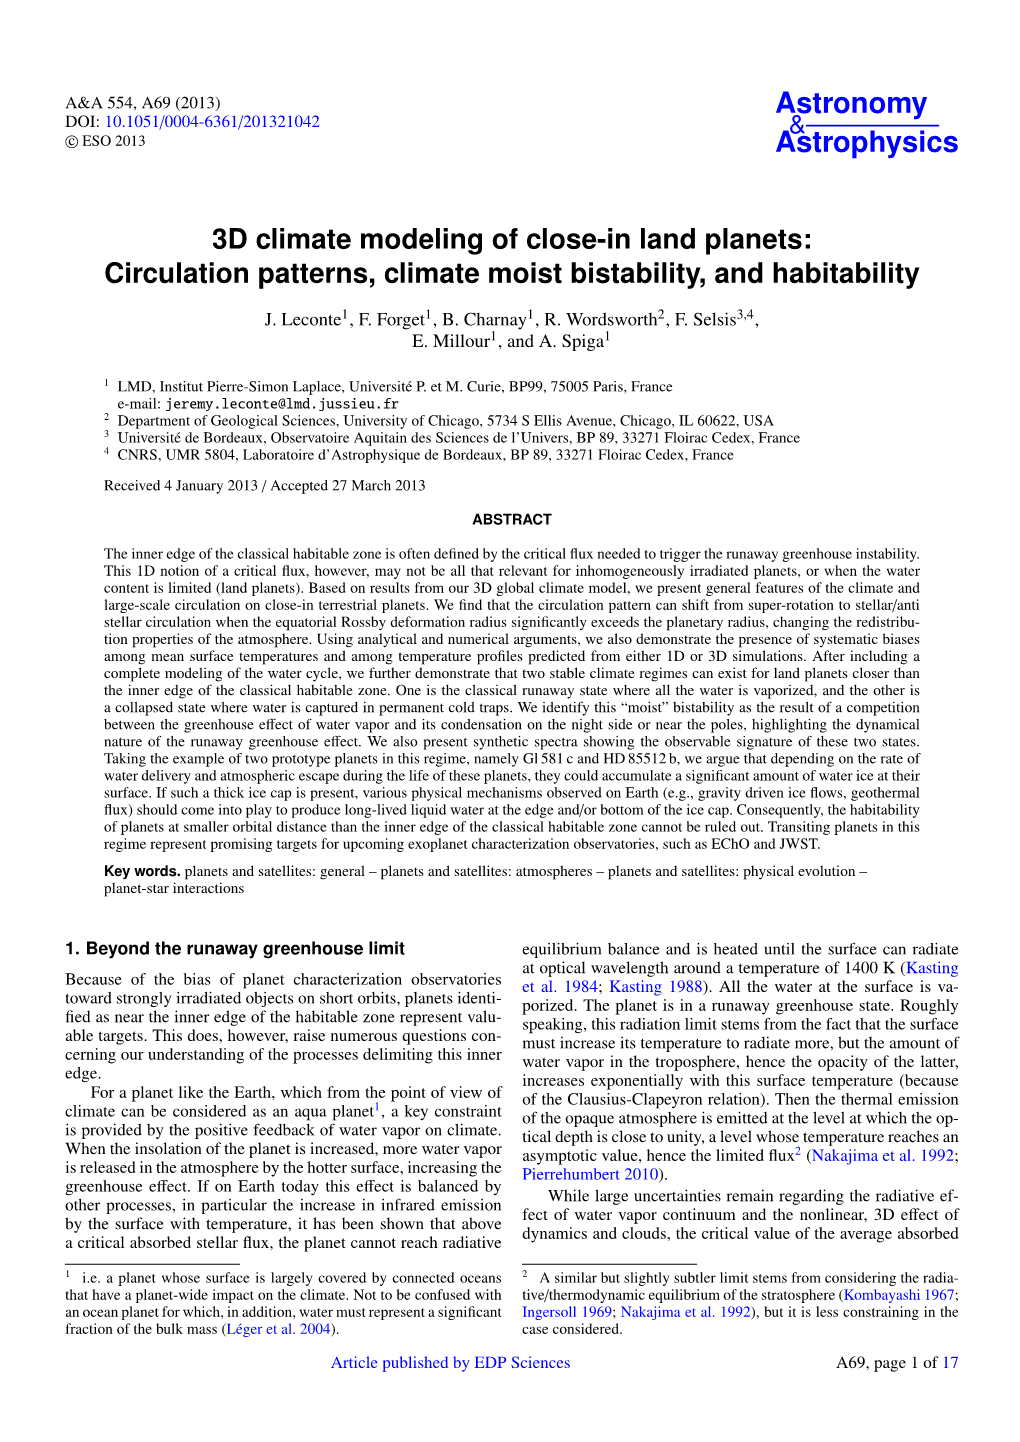 3D Climate Modeling of Close-In Land Planets: Circulation Patterns, Climate Moist Bistability, and Habitability